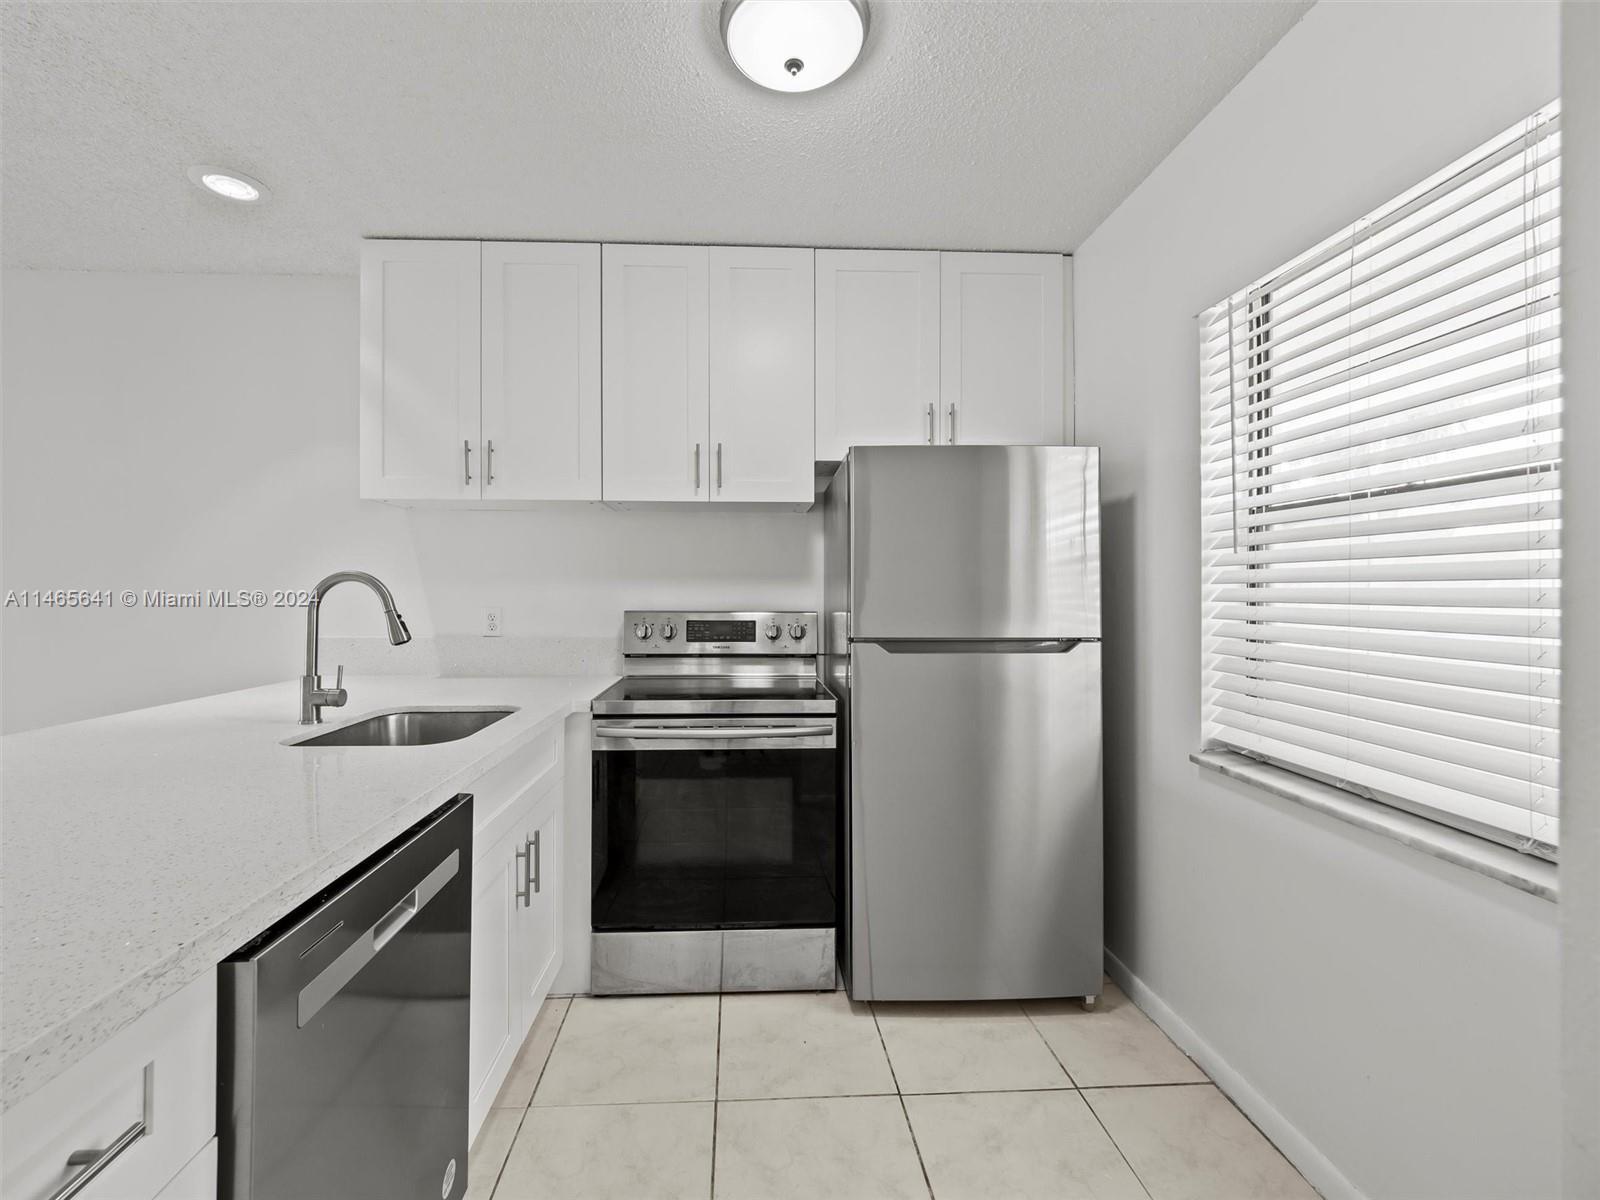 All ages condo - Move-in ready 2/2 in Boca. This condo features an updated open Kitchen with quartz 